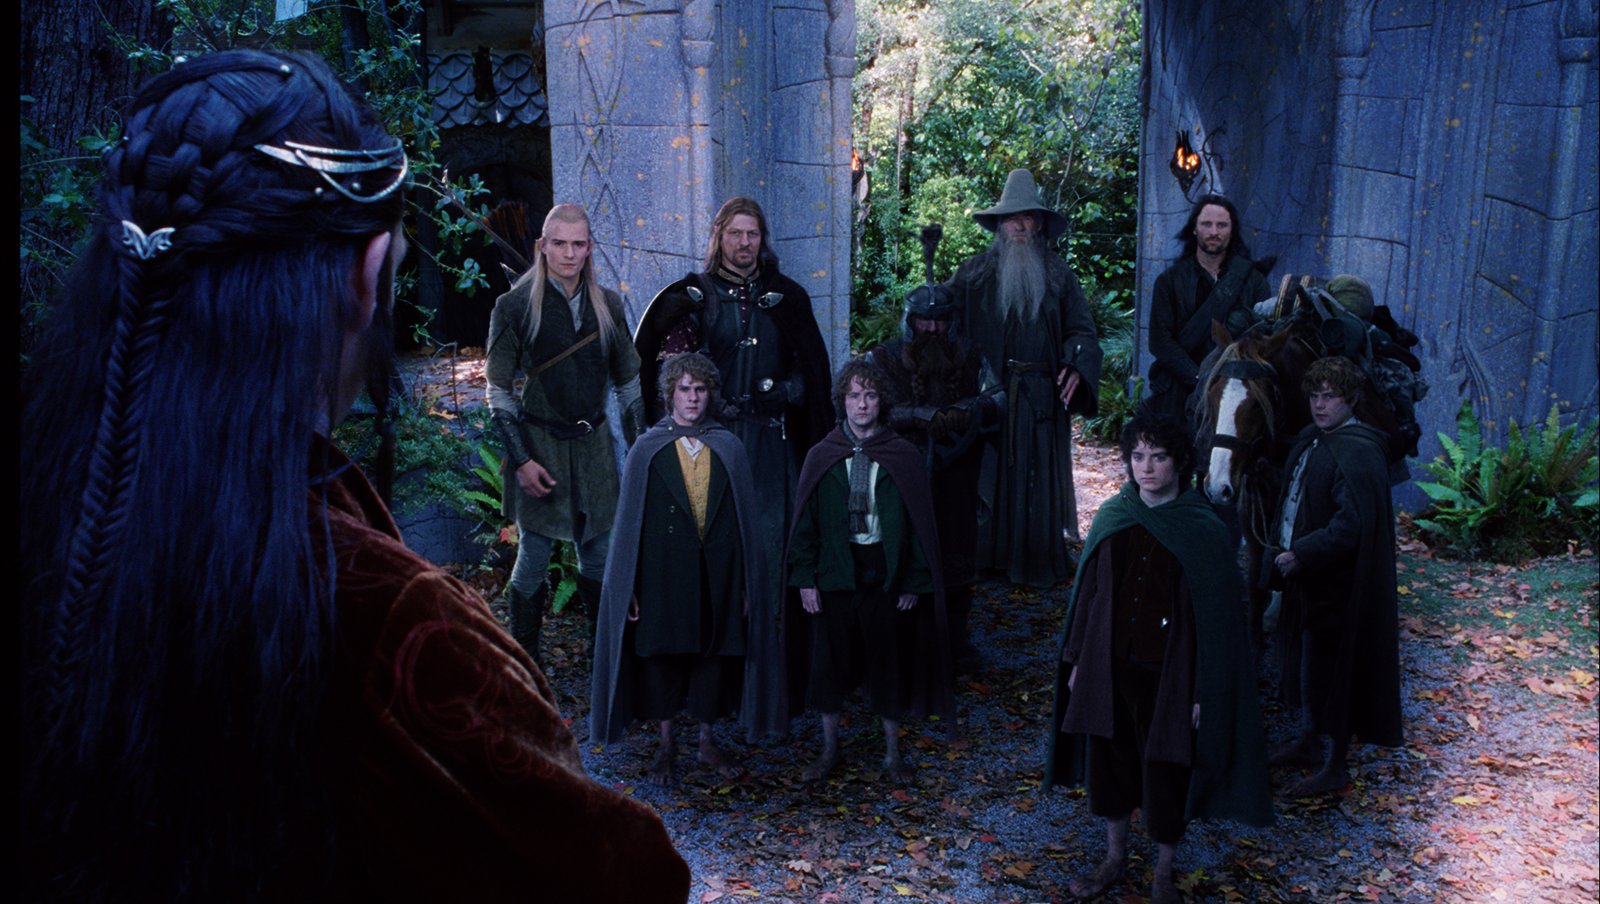 The Lord of the Rings: The Fellowship of the Ring
